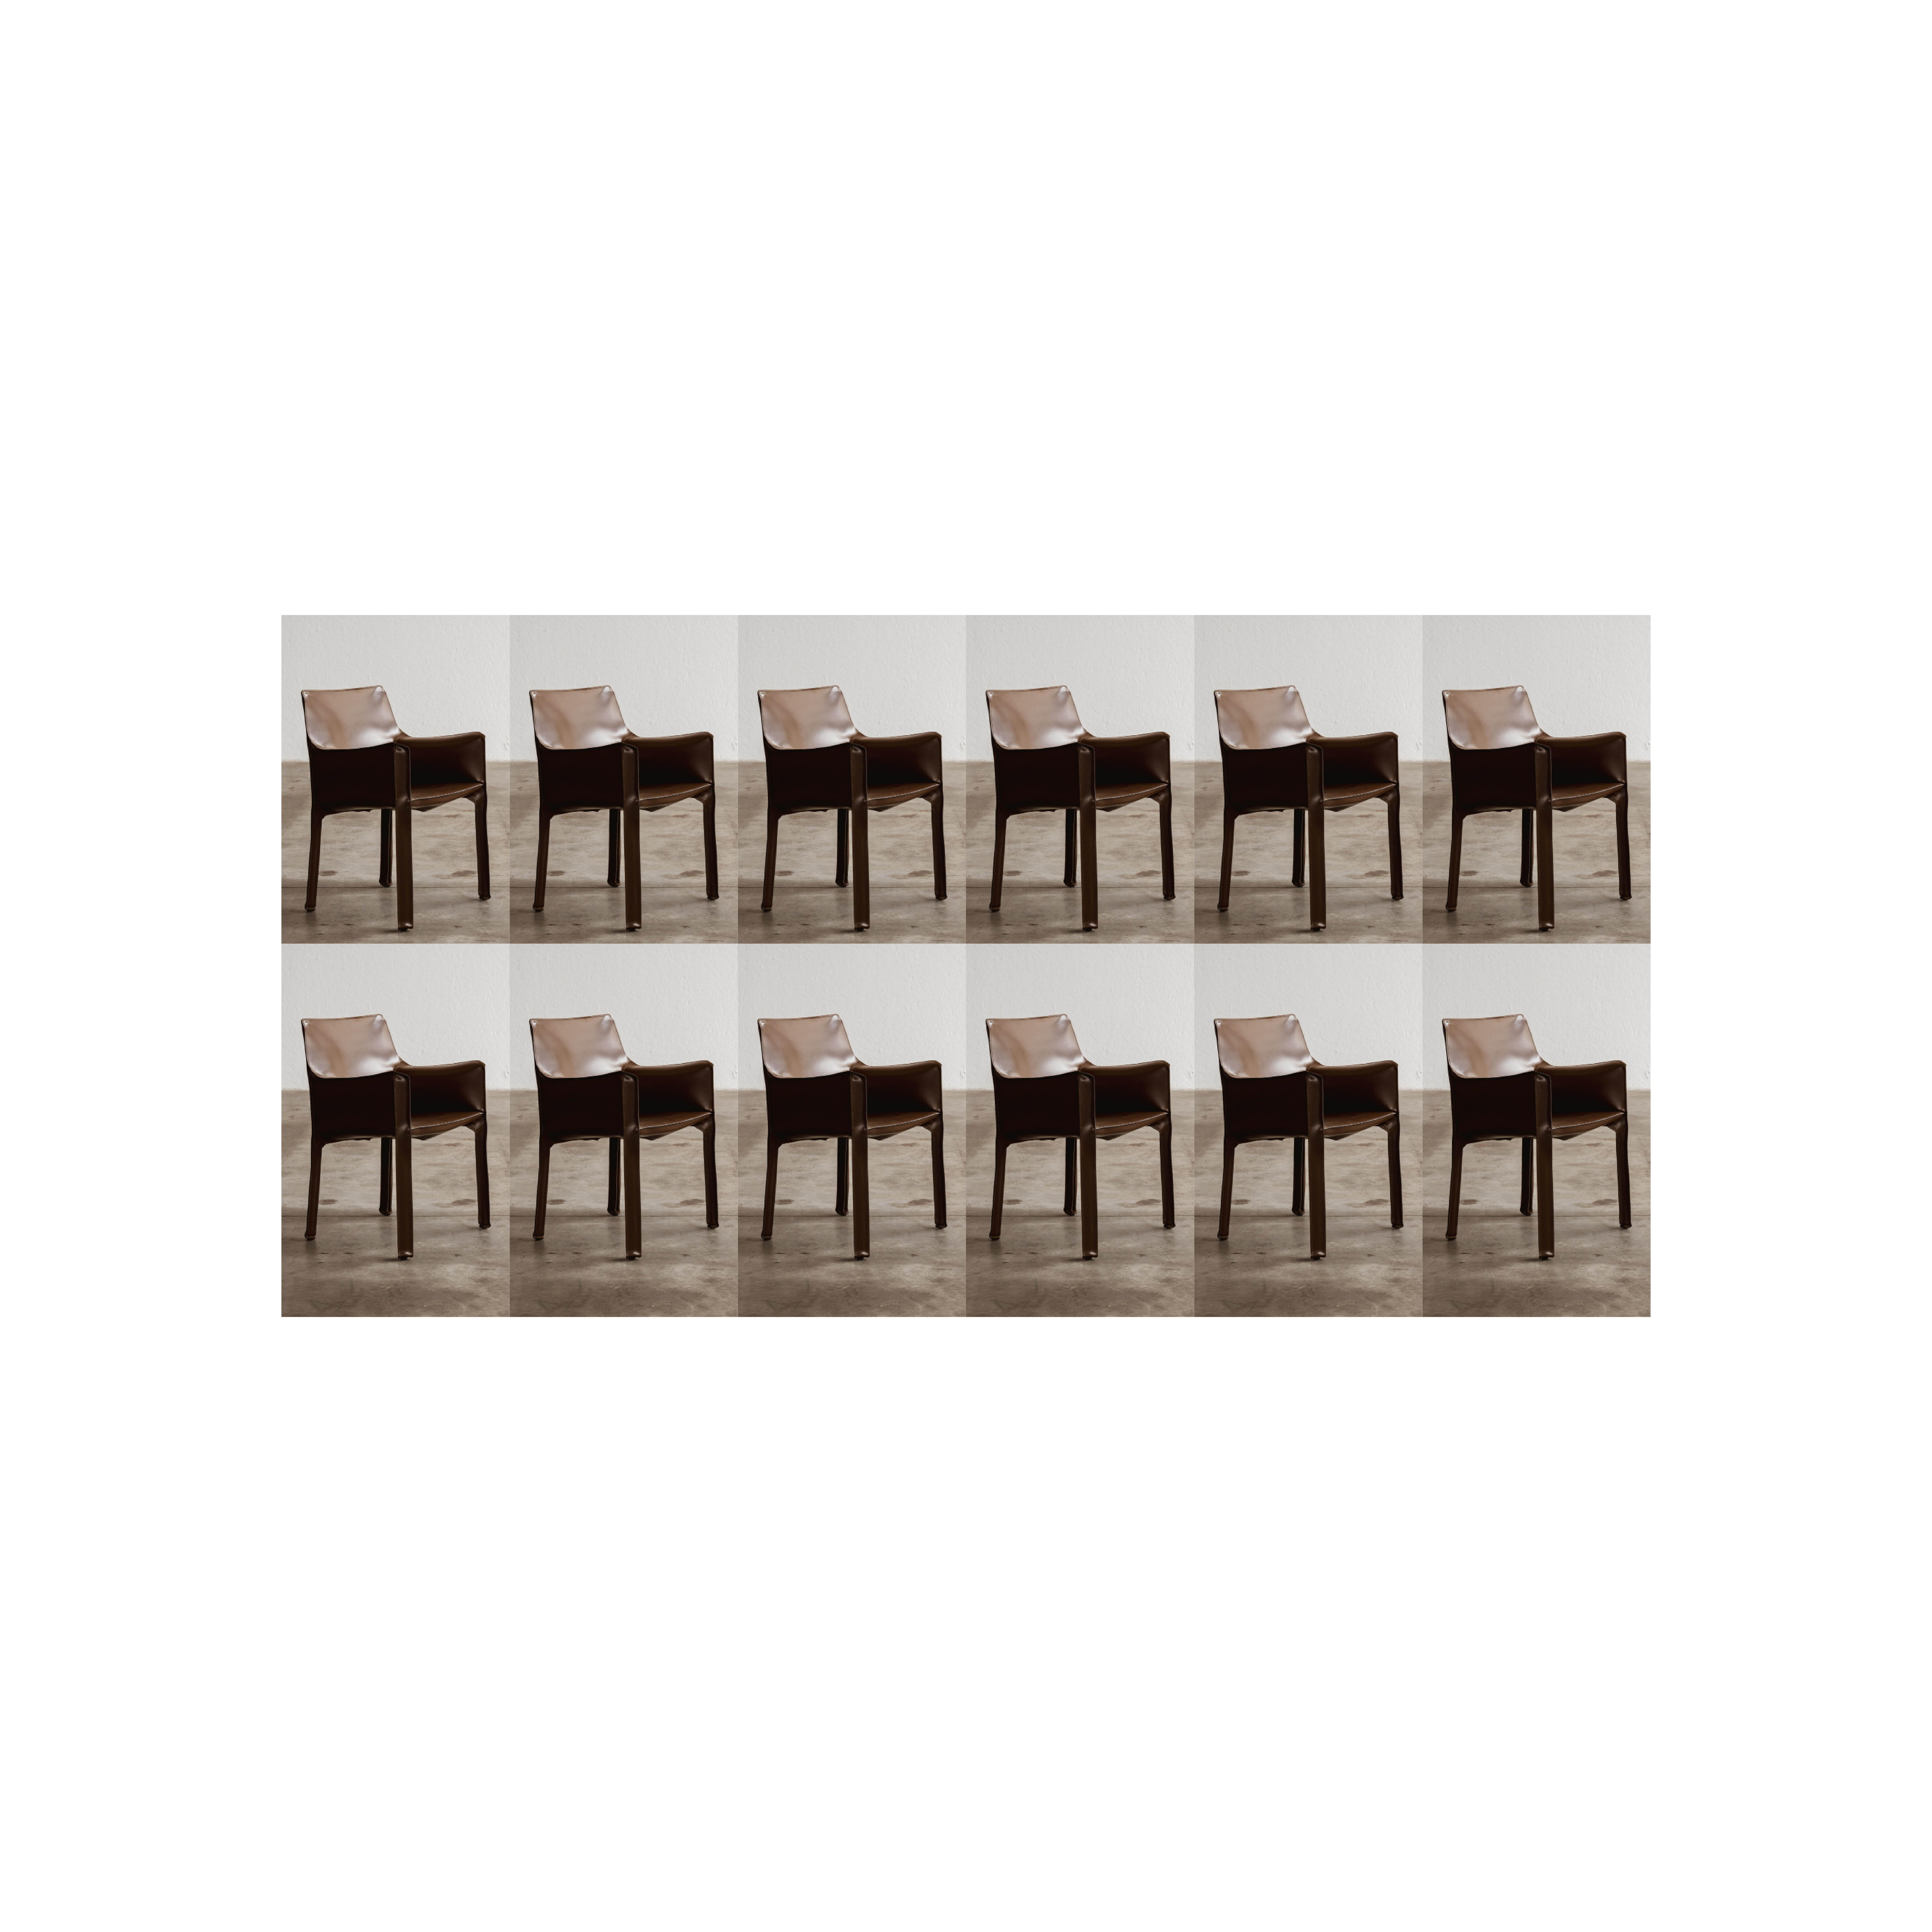 Mario Bellini "CAB 413" Chairs for Cassina in Dark Brown, 1977, Set of 12